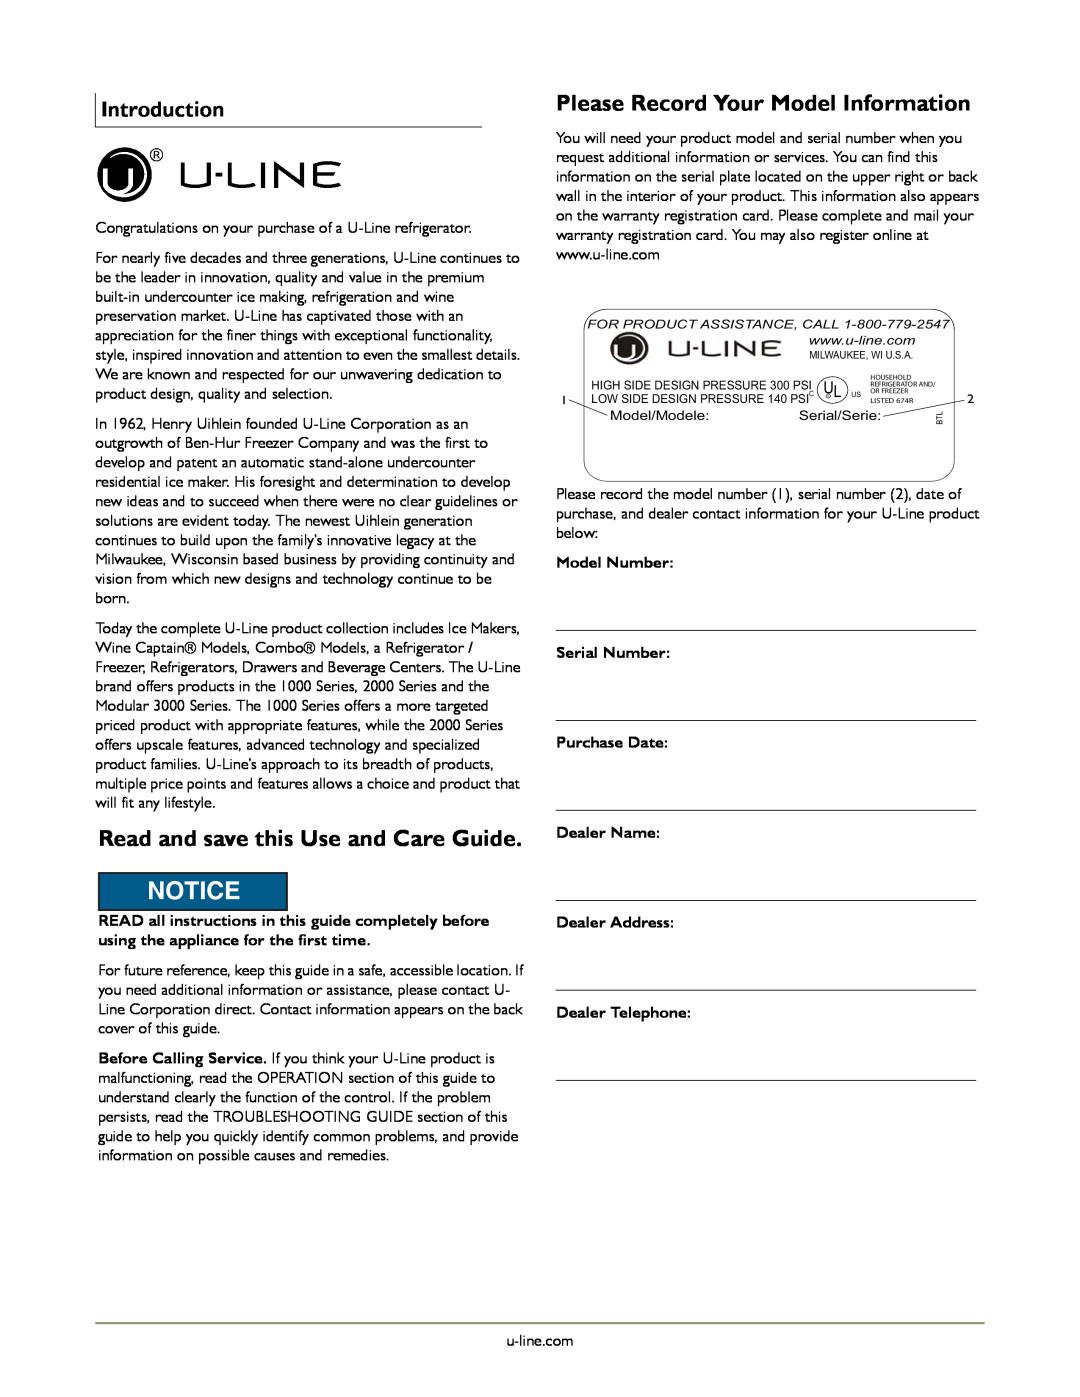 U-Line U-2275ZWCOL-00 Notice, Read and save this Use and Care Guide, Please Record Your Model Information, Introduction 